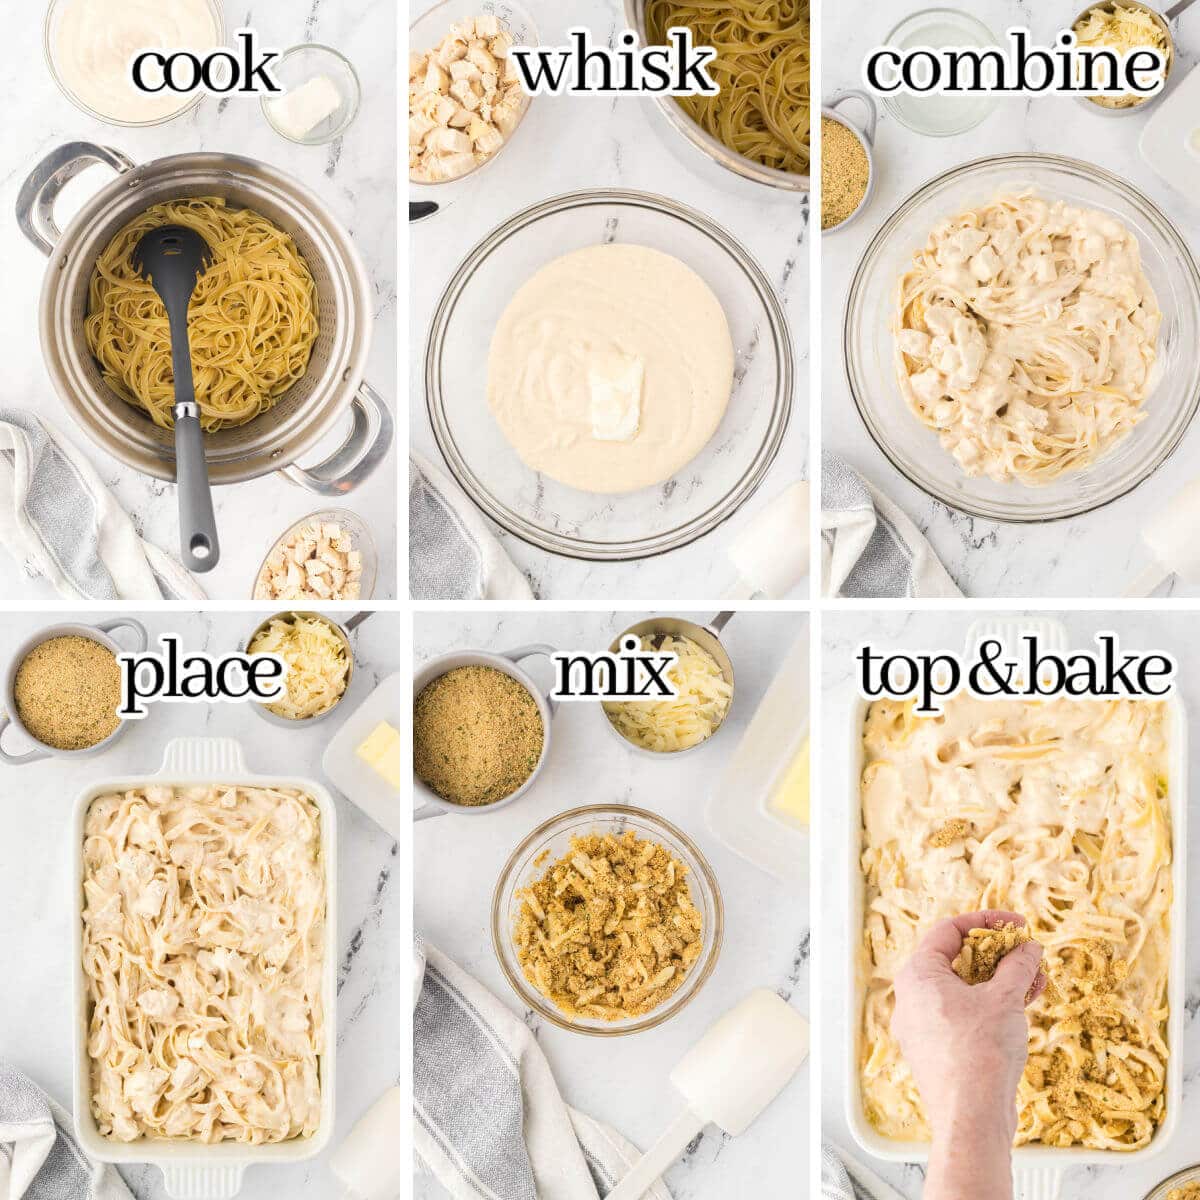 Step-by-step instructions to make the pasta recipe with print overlay.